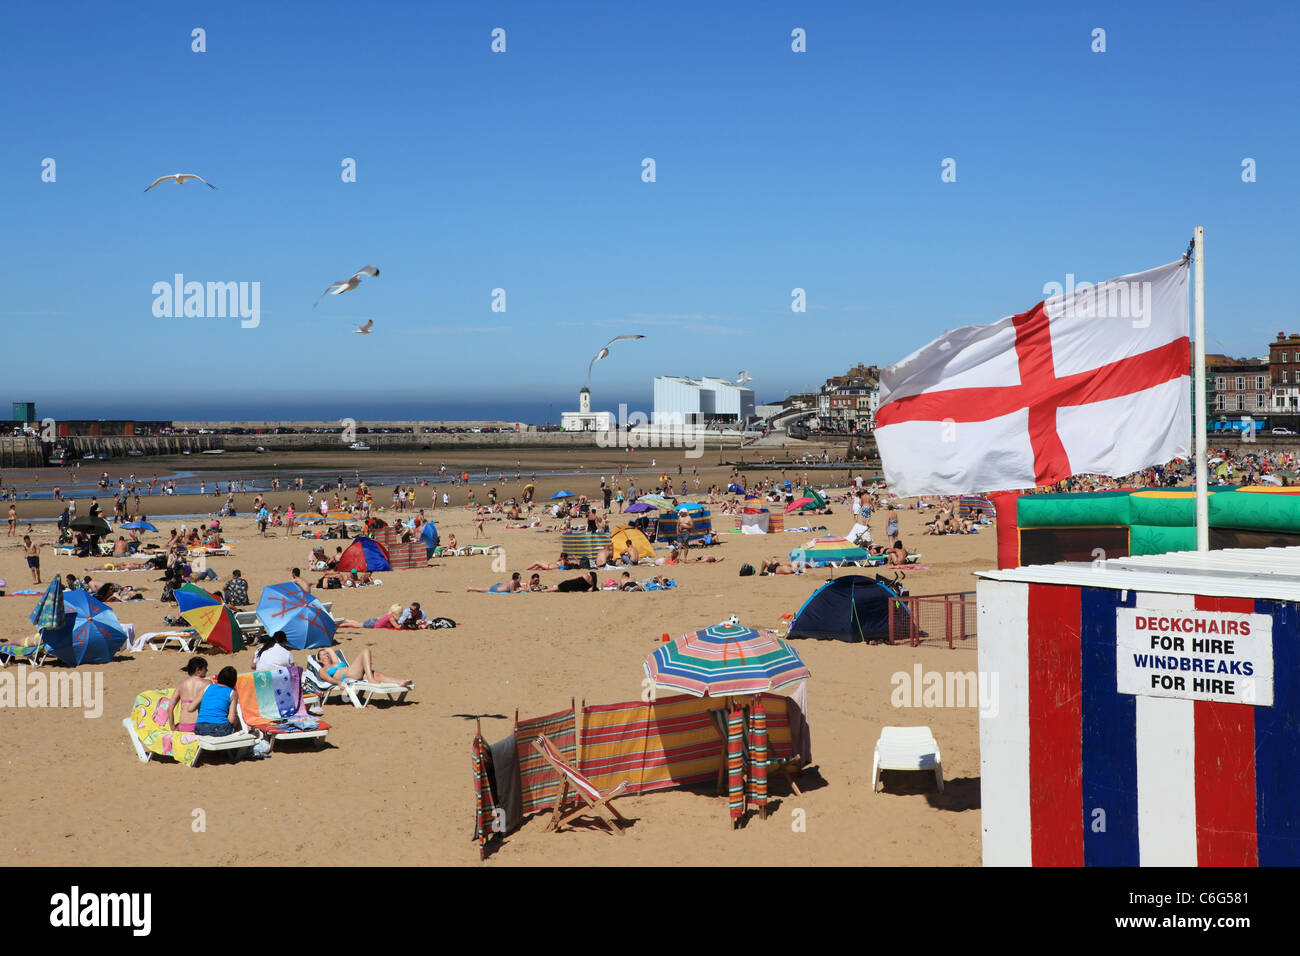 Beach in Margate, Kent, Turner Contemporary Gallery in background Stock Photo